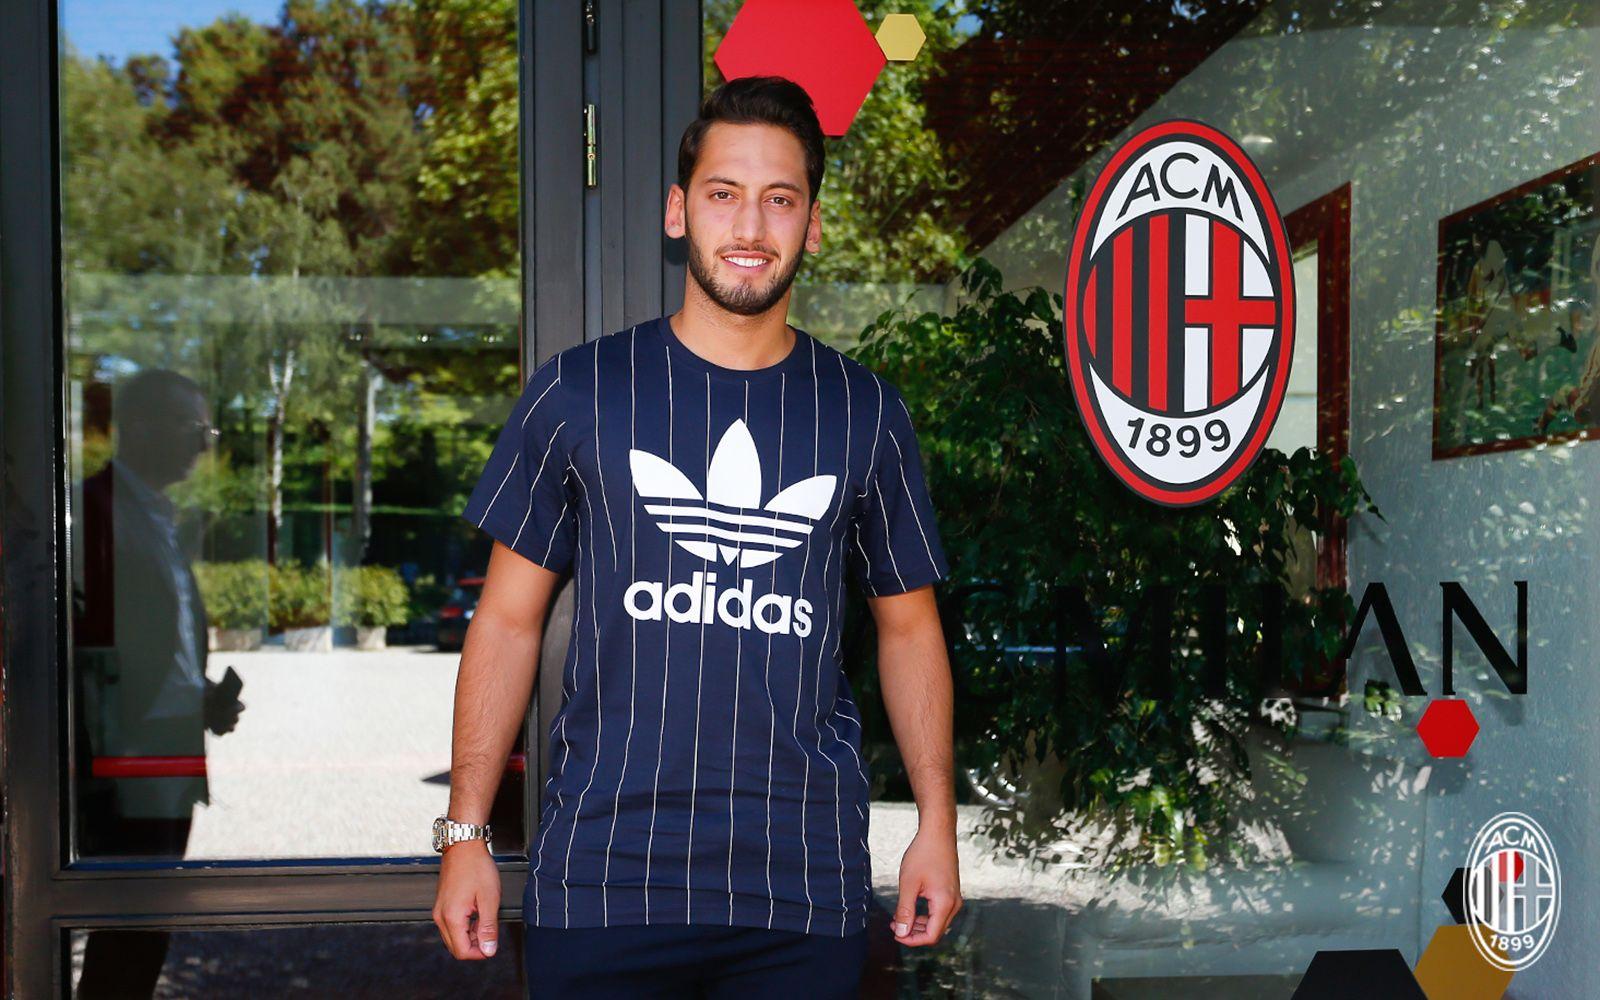 Official: calhanoglu is now red and black